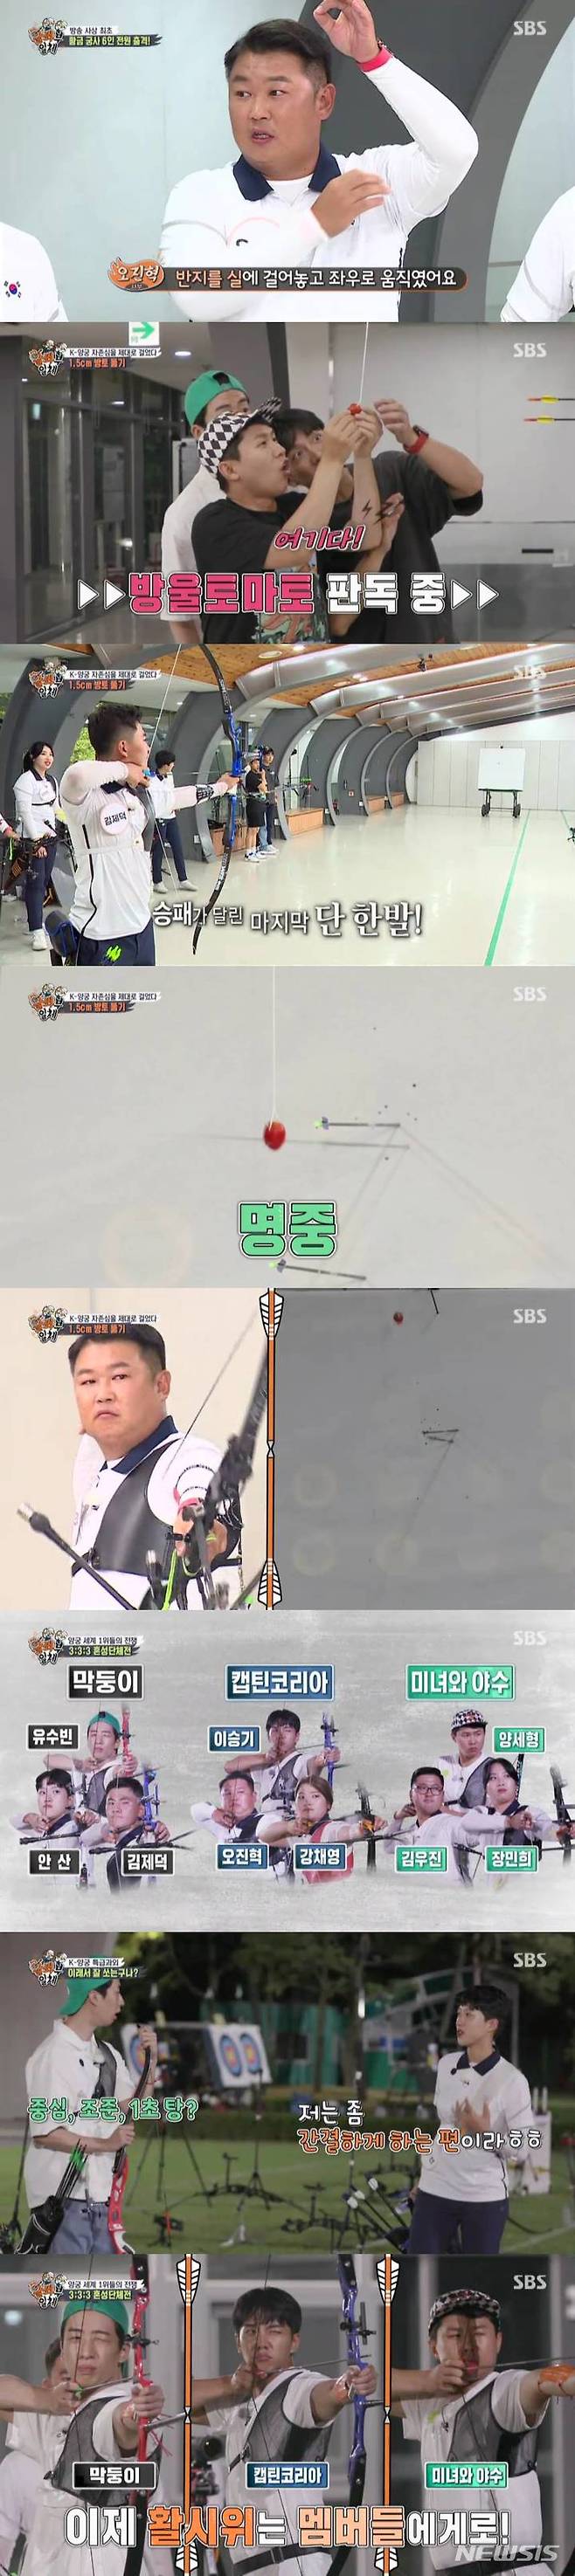 According to Nielsen Korea, a 30-day ratings agency, SBS entertainment All The Butlers, which was broadcast on the 29th, recorded 5.9% of the nationwide household ratings.On this day, archery team exhibition with archery national team Oh Jin-Hyek, Kim Woo-jin, Kim je-deok, Anshan, Kang Chae Young and Chang Kang Min-hee, which won gold medals at the 2020 Tokyo Olympics, was held.Oh Jin-Hyek surprised the members by saying, I shot this thing. He said, I put the ring on the thread with the event Kyonggi and shot the arrow in the ring while moving from side to side.I was hit by one shot, I calculated that this would be the right timing, he added.The six masters were divided into OB team Oh Jin-Hyek, Kim Woo-jin, Kang Chae-young, YB team Anshan, Kang Min-hee and Kim je-deok to challenge the bell tomatoes.Kim Woo-jin and Kang Chae-youngs arrows hit the cherry tomatoes and the youngest Kim je-deok and the eldest brother Oh Jin-Hyek were surprised to see through.In addition, Oh Jin-Hyek was cheered by perfectly matching moving tomatoes at once.Since then, the master and members have been divided into three teams and have started a group exhibition with a gold badge.The youngest line Anshan, Kim je-deok and Yoo Soo-bin are the smiling team, Oh Jin-Hyek, Kang Chae-young and Lee Seung-gi are the Captain America: Civil War Korea team, Kim Woo-jin, Kang Min-hee and Yang Se-hyeong are the  The Beauty and the Beast team united.Before the showdown, he also had an archery tutoring session with masters; Anshan revealed a routine card that read: Central, aim, 1 second bath!; Anshan said: Im a bit concise.Its about centering, aiming, and tang in a second, he said. Just seeing the writing helps a lot.Kim je-deok also showed his routine card and stressed protecting his left arm: When he shoots the bow and his left arm goes down, the arrow goes to the wrong place.You have to protect your arms until the arrow hits the target. When the full-scale confrontation began, the masters showed off their perfect skills like Kyonggi, and the members also performed unexpectedly.The three teams, who showed their ability to play in the last minute, tied the game in the first set and added tension.The second set results showed that Captain America: Civil War Korea and Beast teams scored 52 points and Beauty and the Beast team continued their tight battle with 51 points.In the final three sets, Kang Min-hee and Yang Se-hyeong left a disappointment with seven and five points, respectively, while Captain America: Civil War Korea Lee Seung-gi scored eight and Bobitch team Yoo Soo-bin scored five. The ar Korea team is in the lead.With only one shot left, Beauty and the Beast Kim Woo-jin shot 10 points and Bobbie Anshan shot 9 points, but Oh Jin-Hyek shot 9 points to win the Captain America: Civil War Korea team.The three teams fierce battle added to the fun of watching, and Oh Jin-Hyeks last arrow was the highest one minute with a rating of 9.7% per minute.After Kyonggi ended, the masters said, I think the archery is more known as Im shooting All The Butlers.I would like to say thank you for representing the Korean archery, and I would like to ask for your interest and love in the future. On the other hand, at the end of the broadcast, the appearance of Kim Eun-hee, the master of genre, was announced, raising expectations for next weeks broadcast.